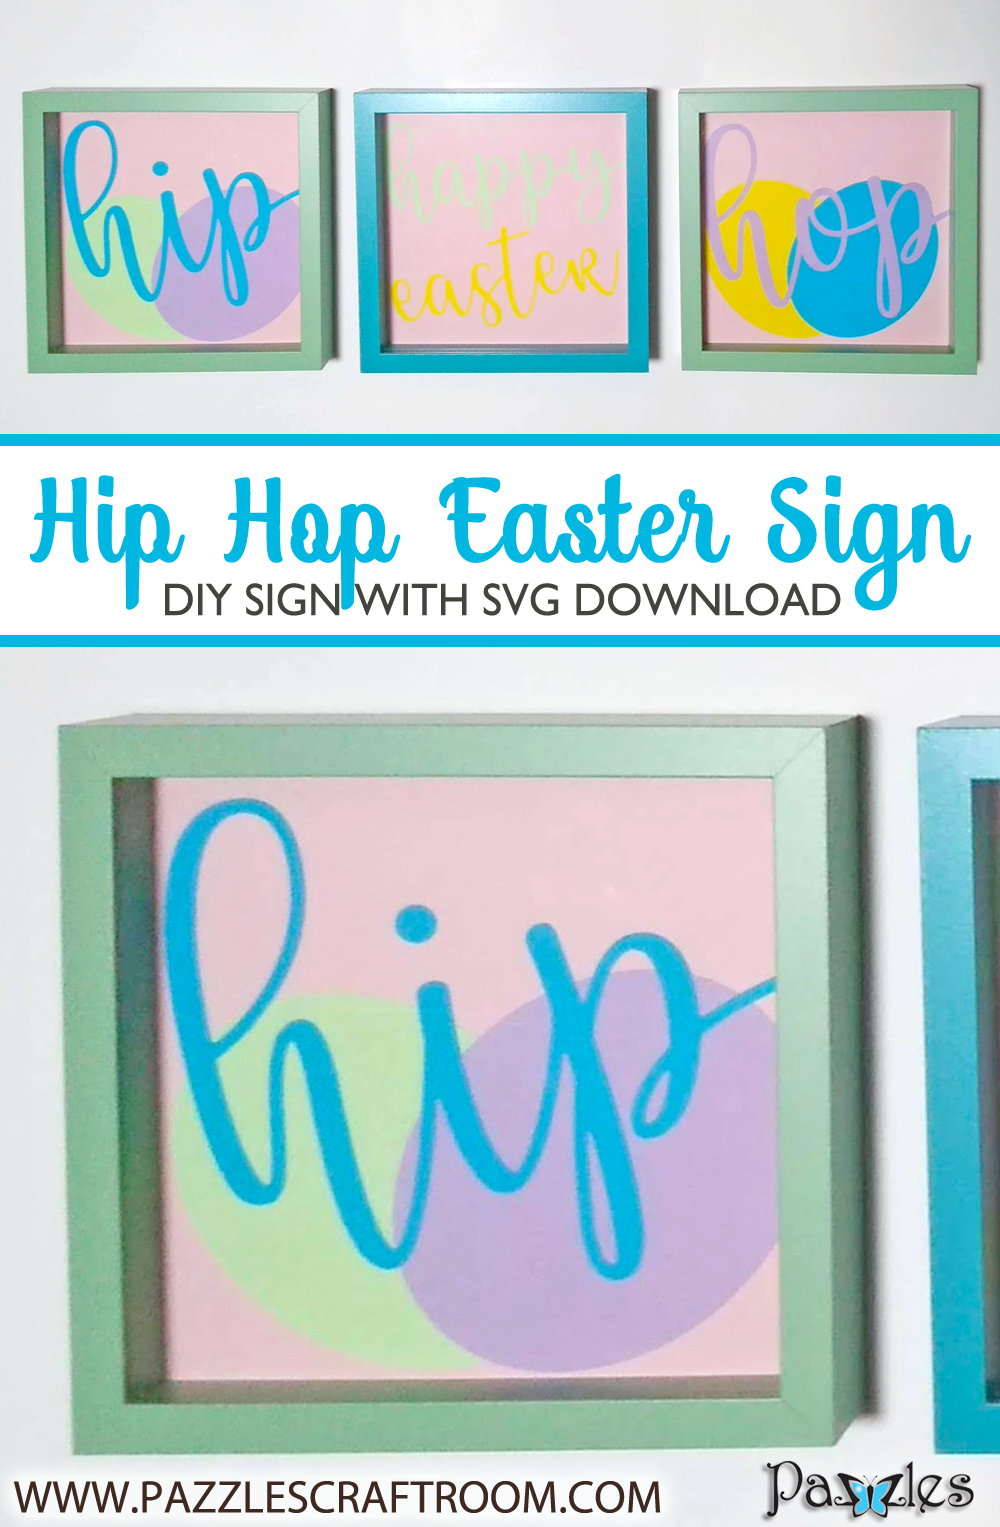 Pazzles DIY Easter Home Decor Trio with instant SVG download. Compatible with all major electronic cutters including Pazzles Inspiration, Cricut, and Silhouette Cameo. Design by Renee Smart. 